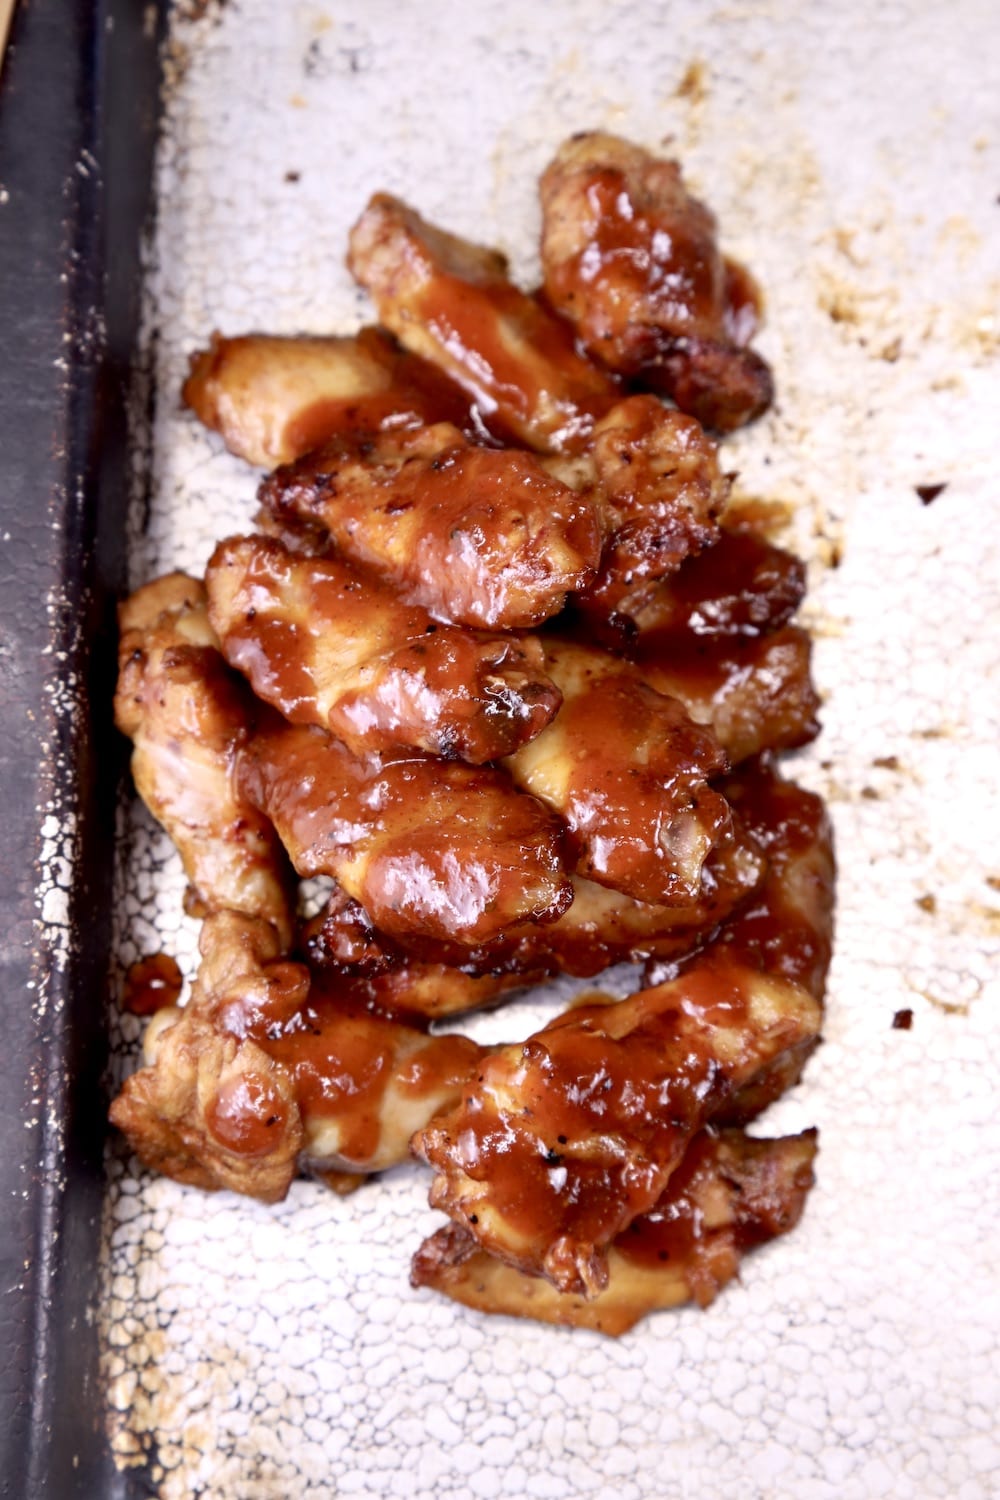 Pile of BBQ chicken wings on a sheet pan